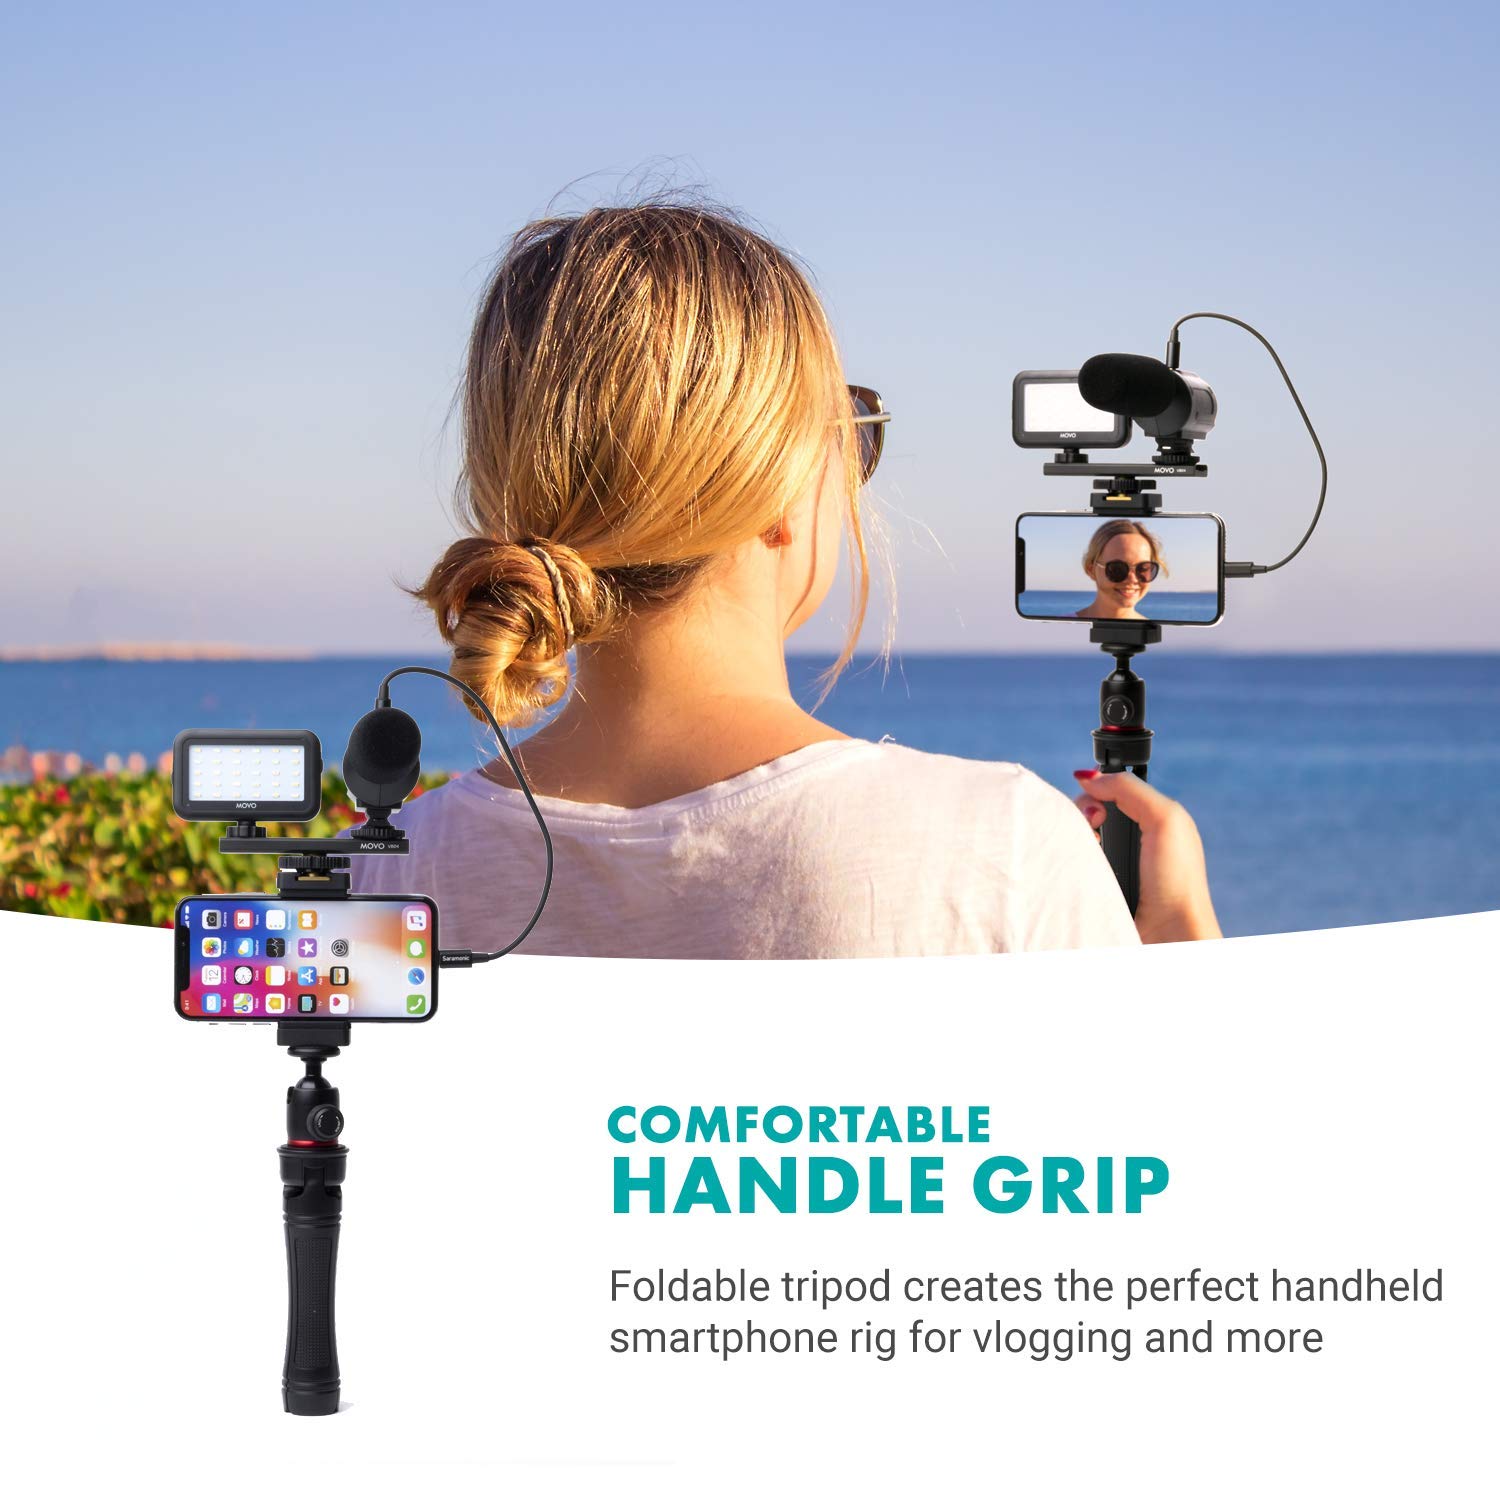 Movo iVlogger Vlogging Kit for iPhone - Lightning Compatible YouTube Starter Kit for Content Creators - Accessories: Phone Tripod, Phone Mount, LED Light and Shotgun Microphone  - Acceptable